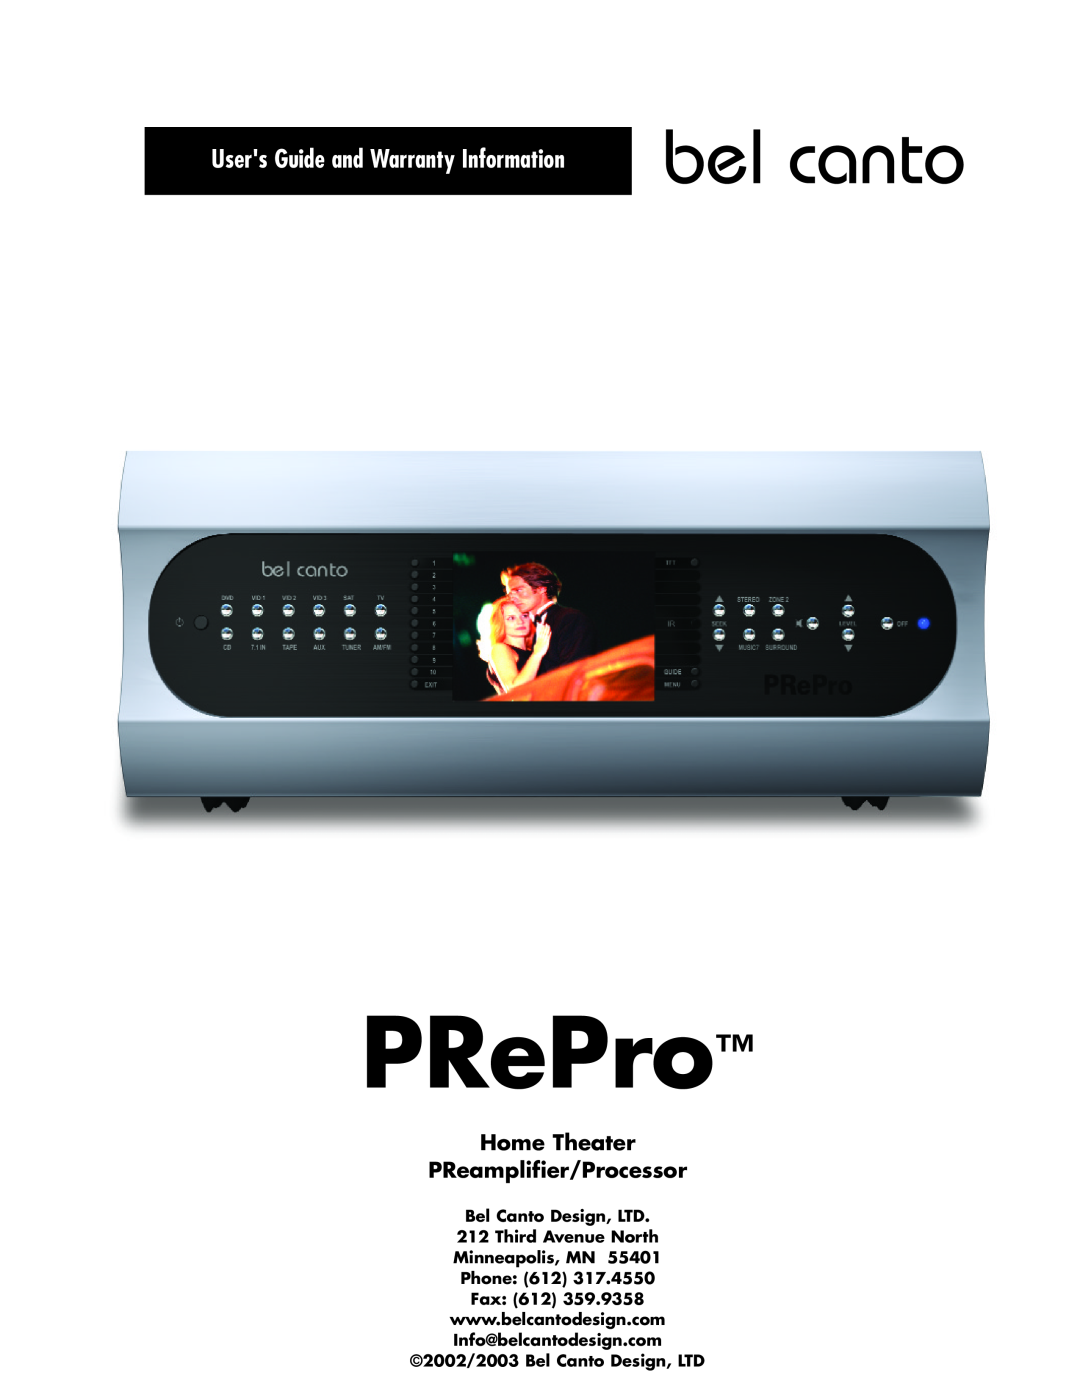 Bel Canto Design PReProTM warranty Users Guide and Warranty Information, Home Theater PReamplifier/Processor 